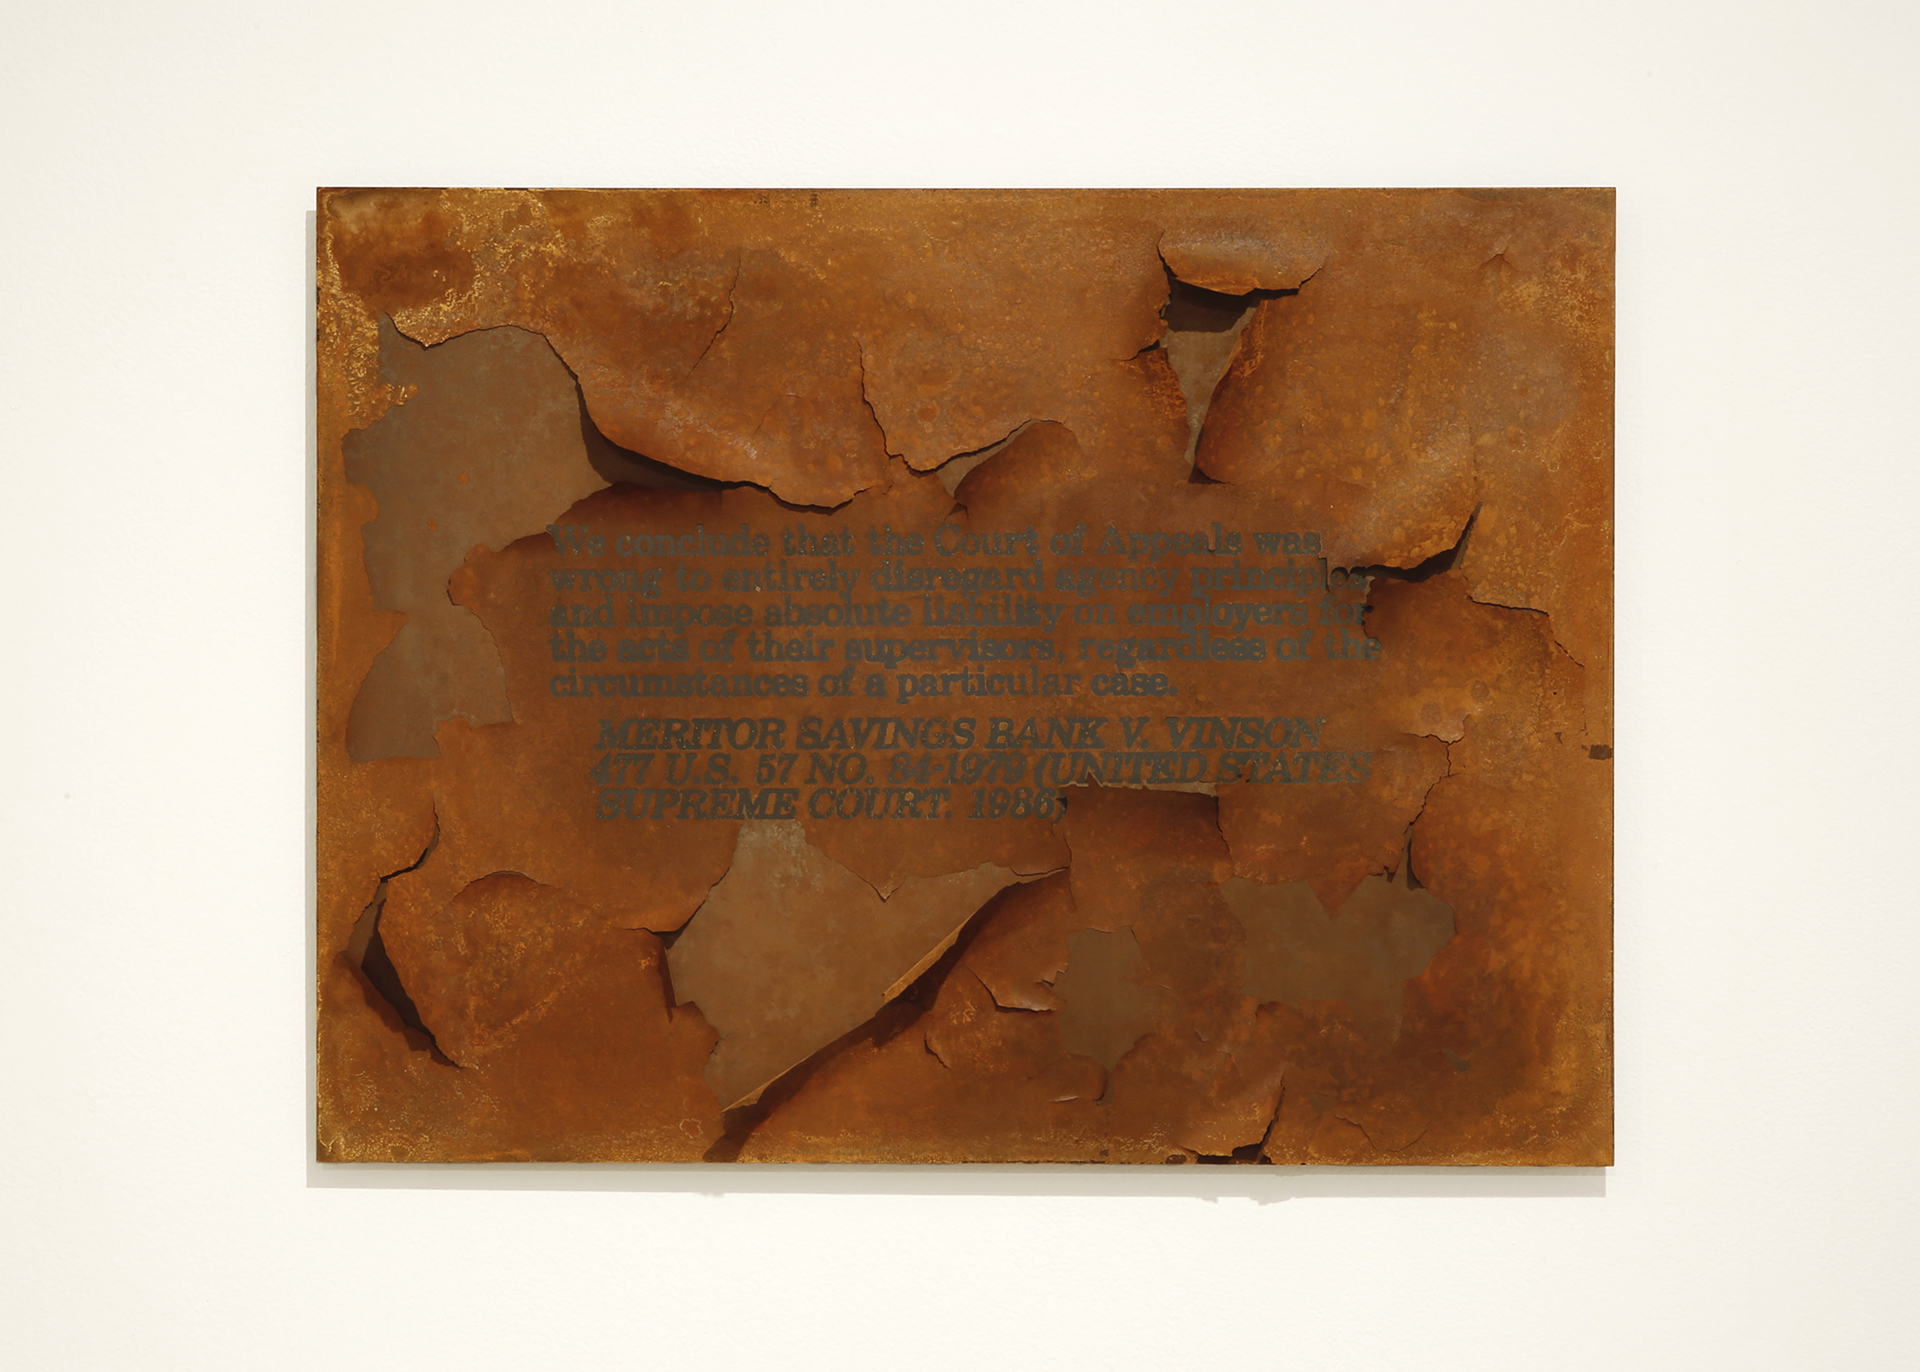 Screenprint resist on steel with rust patina, cited text from 1986 Supreme Court decision on workplace sexual harassment